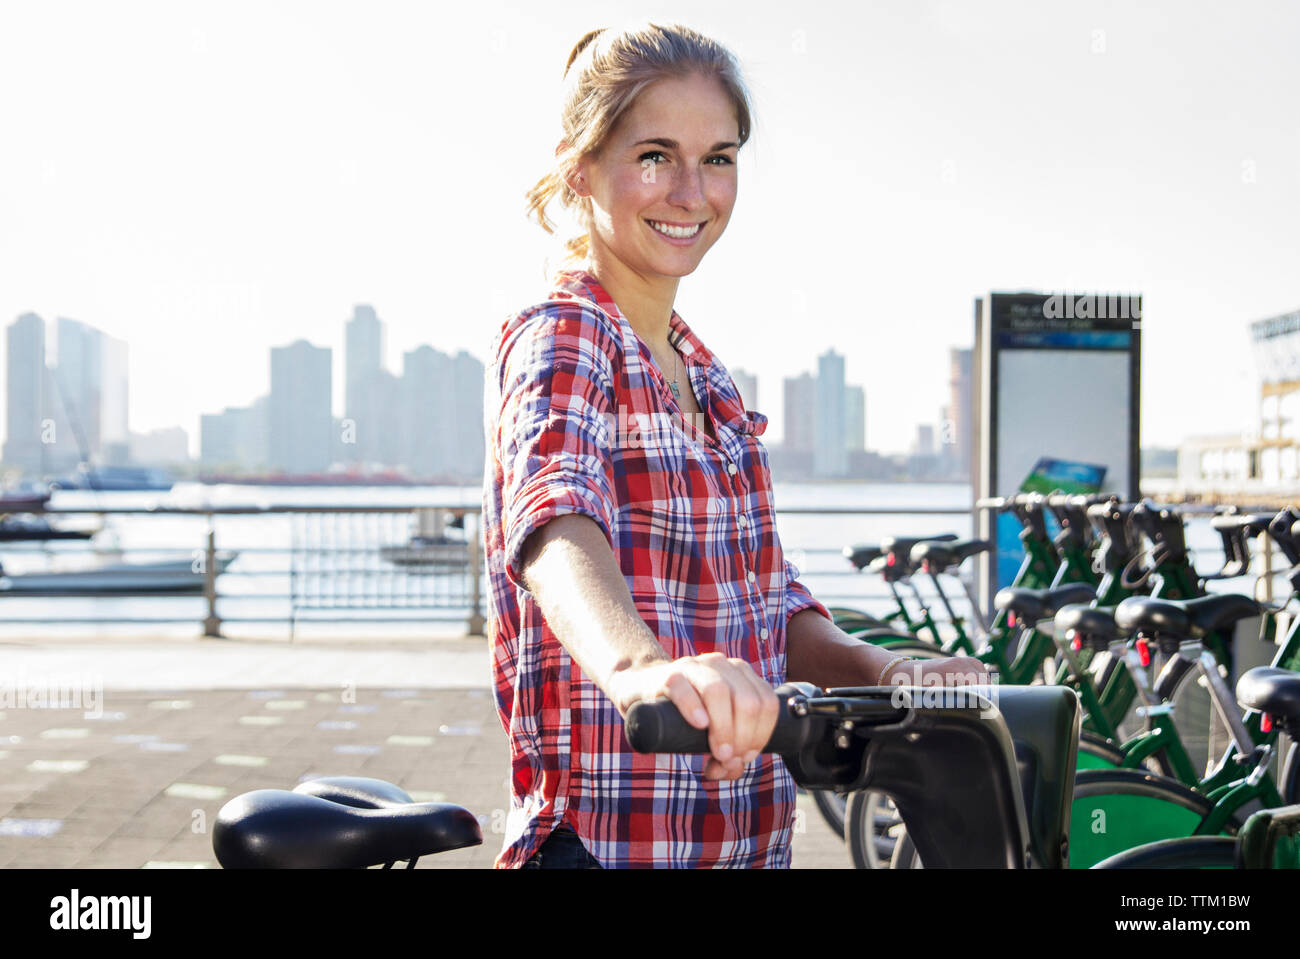 Portrait of confident smiling woman renting bicycle by lake in city Stock Photo